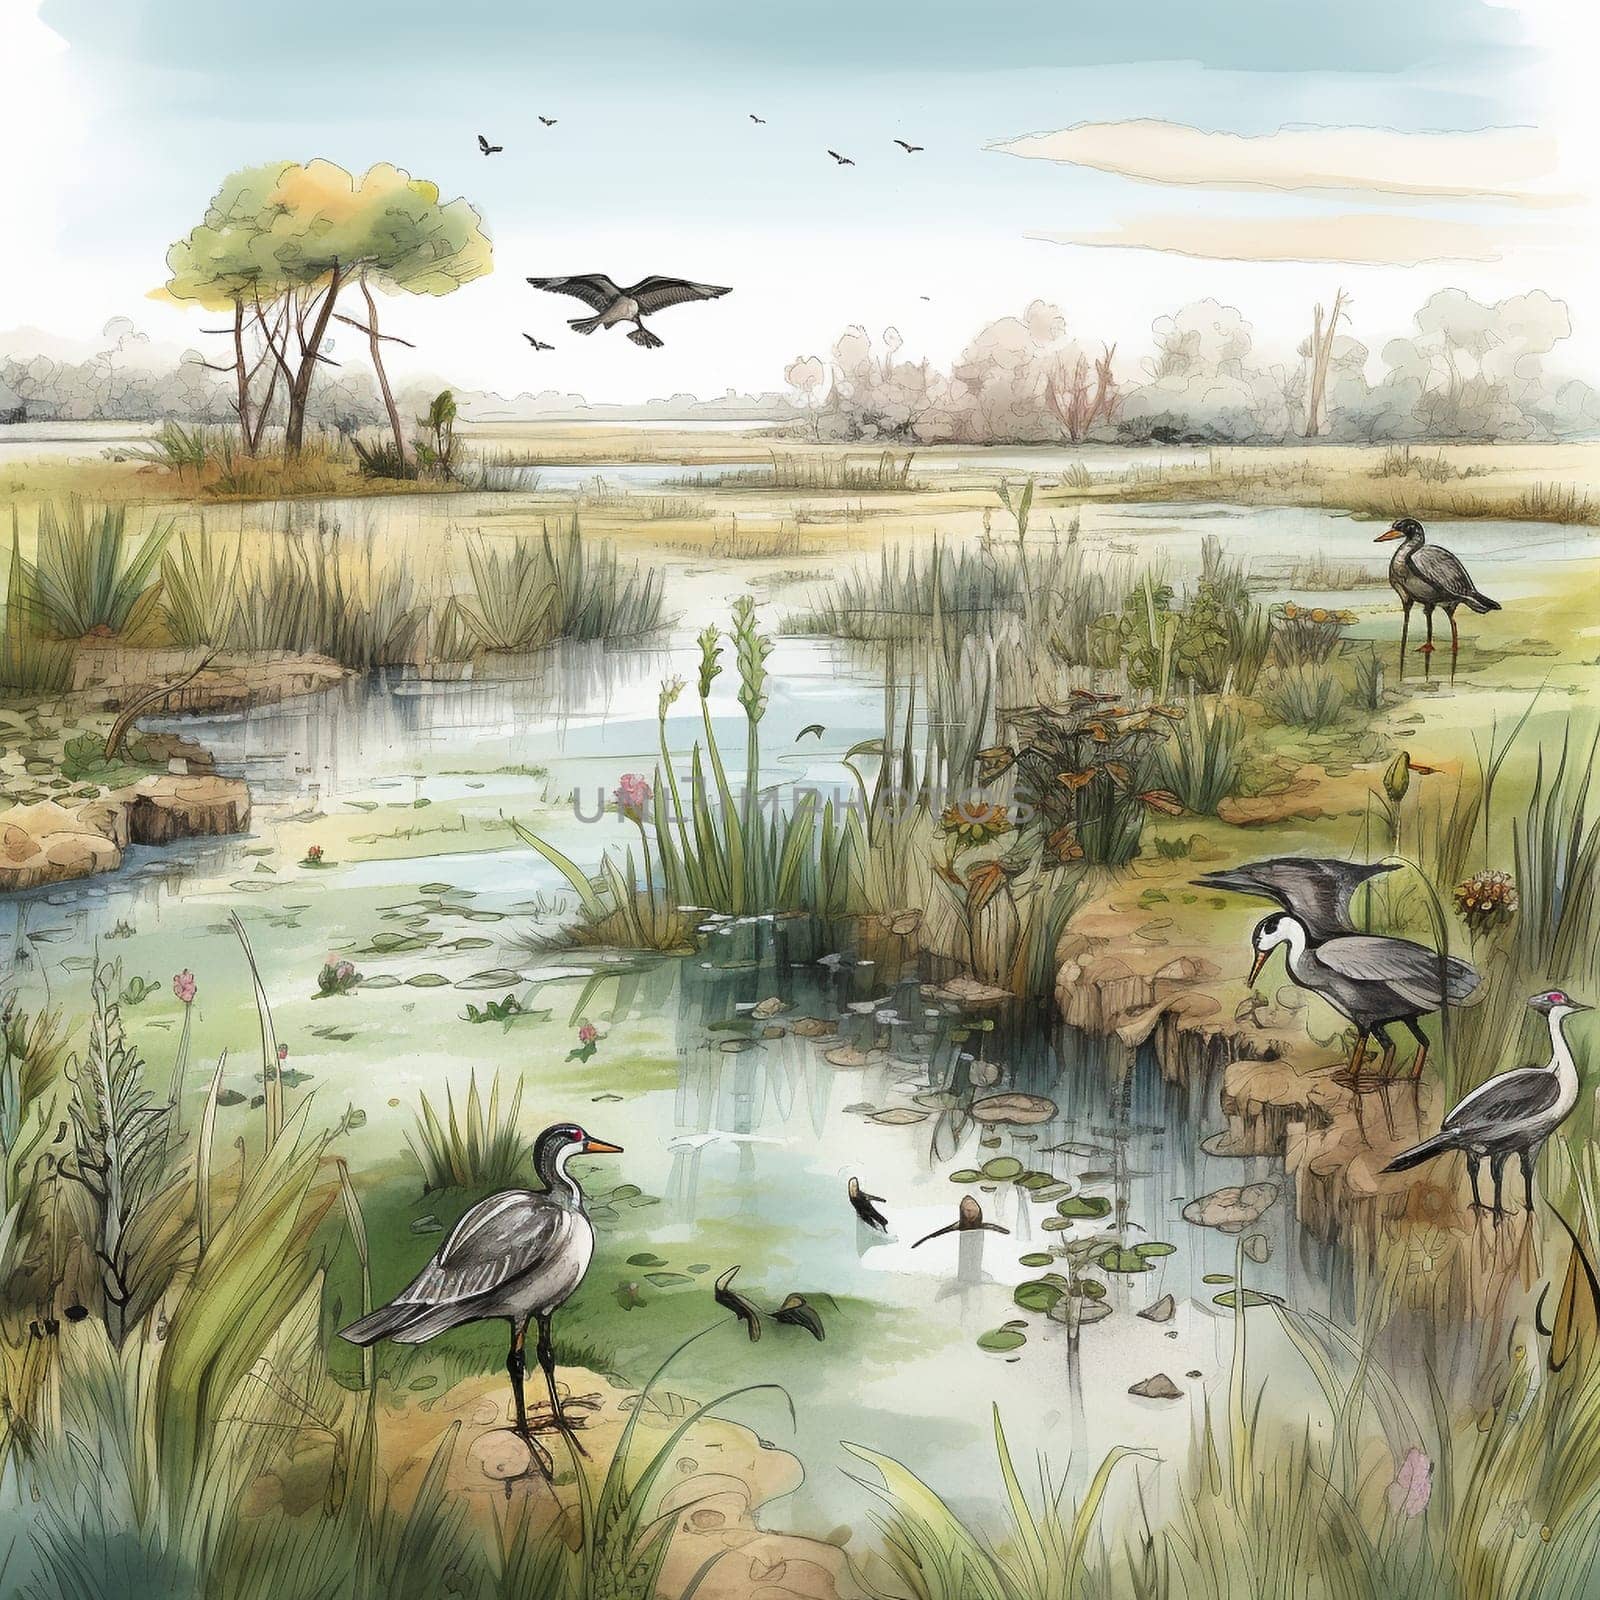 This image depicts a lush wetland ecosystem teeming with wildlife. It highlights the importance of wetlands in water conservation, flood control, and biodiversity. Wetlands are unique and valuable ecosystems that provide critical habitat for diverse plant and animal life, and they also provide important services such as water filtration and flood control. However, wetlands are under threat from human activities such as development, pollution, and climate change. This image represents the beauty and value of wetlands and the urgent need to protect them for the benefit of people and the planet.